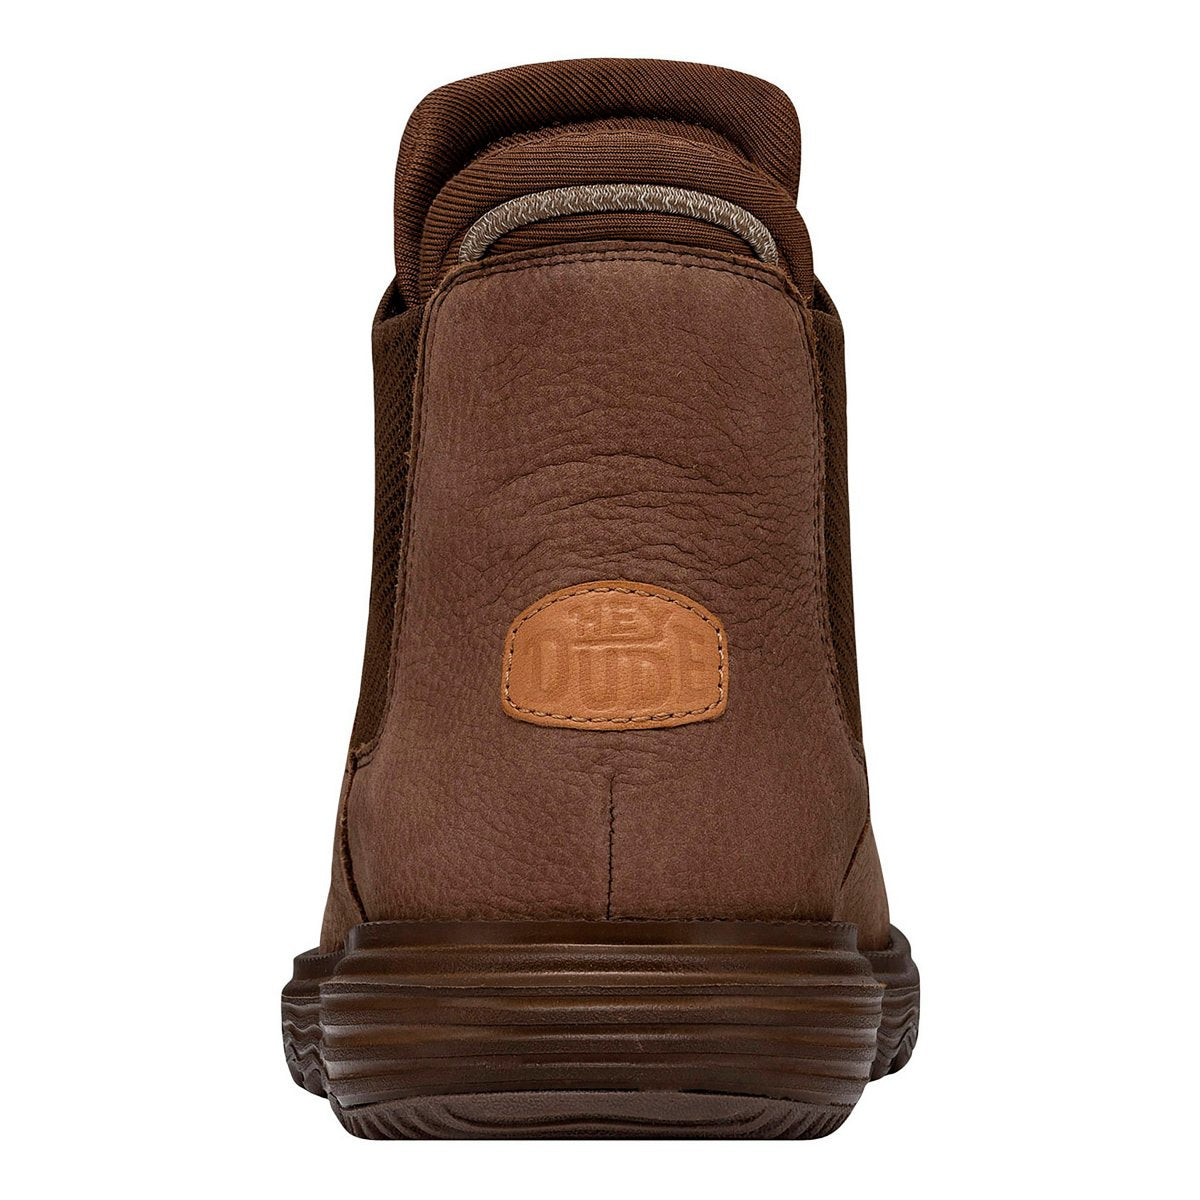 HEY DUDE - Bransons boot craft leather m Brown